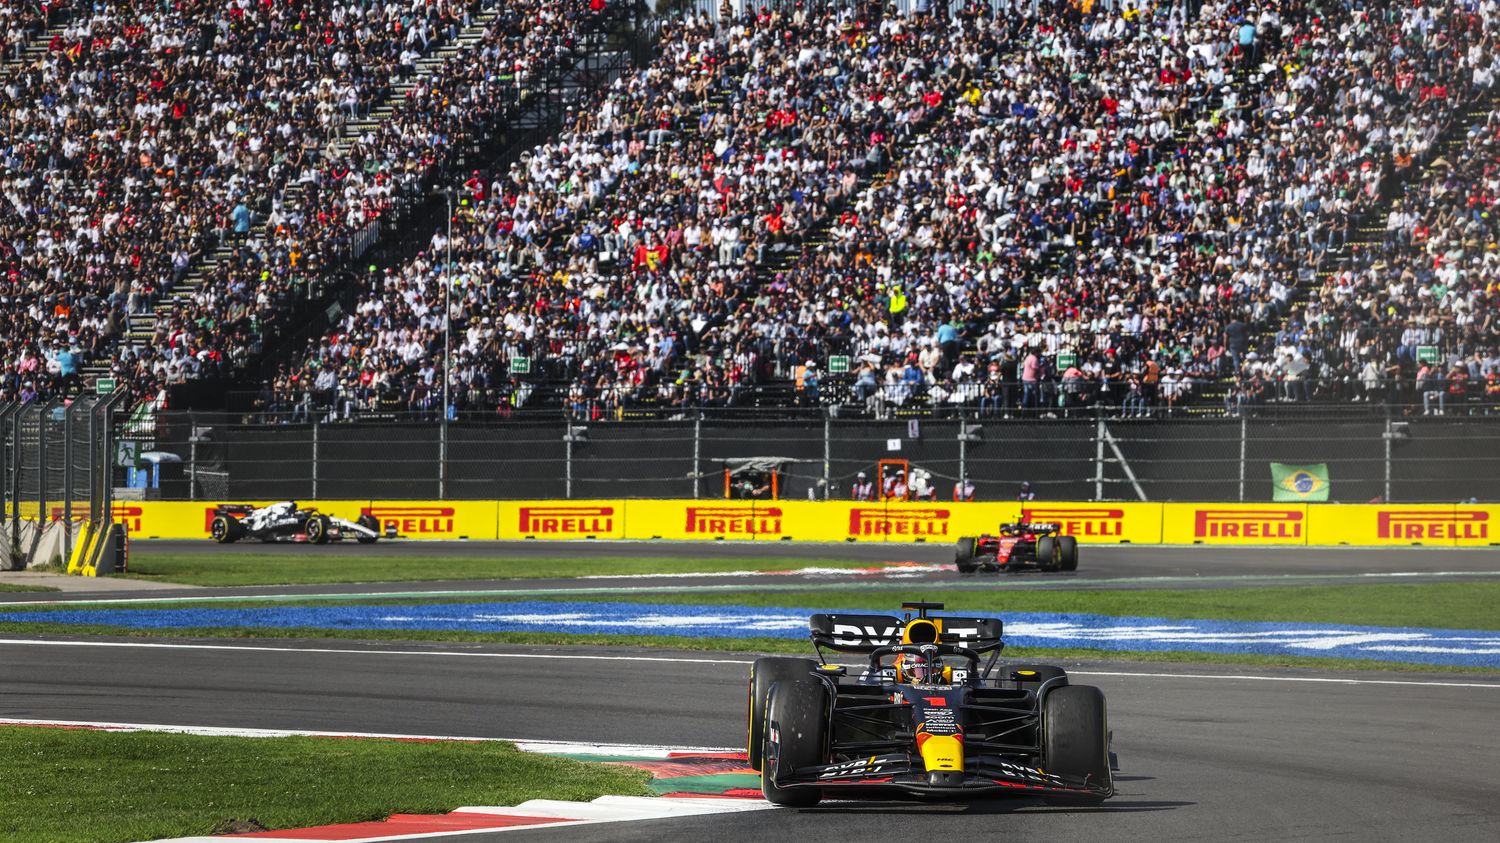 F1: record Max Verstappen to his 16th victory this season at the Mexican Grand Prix